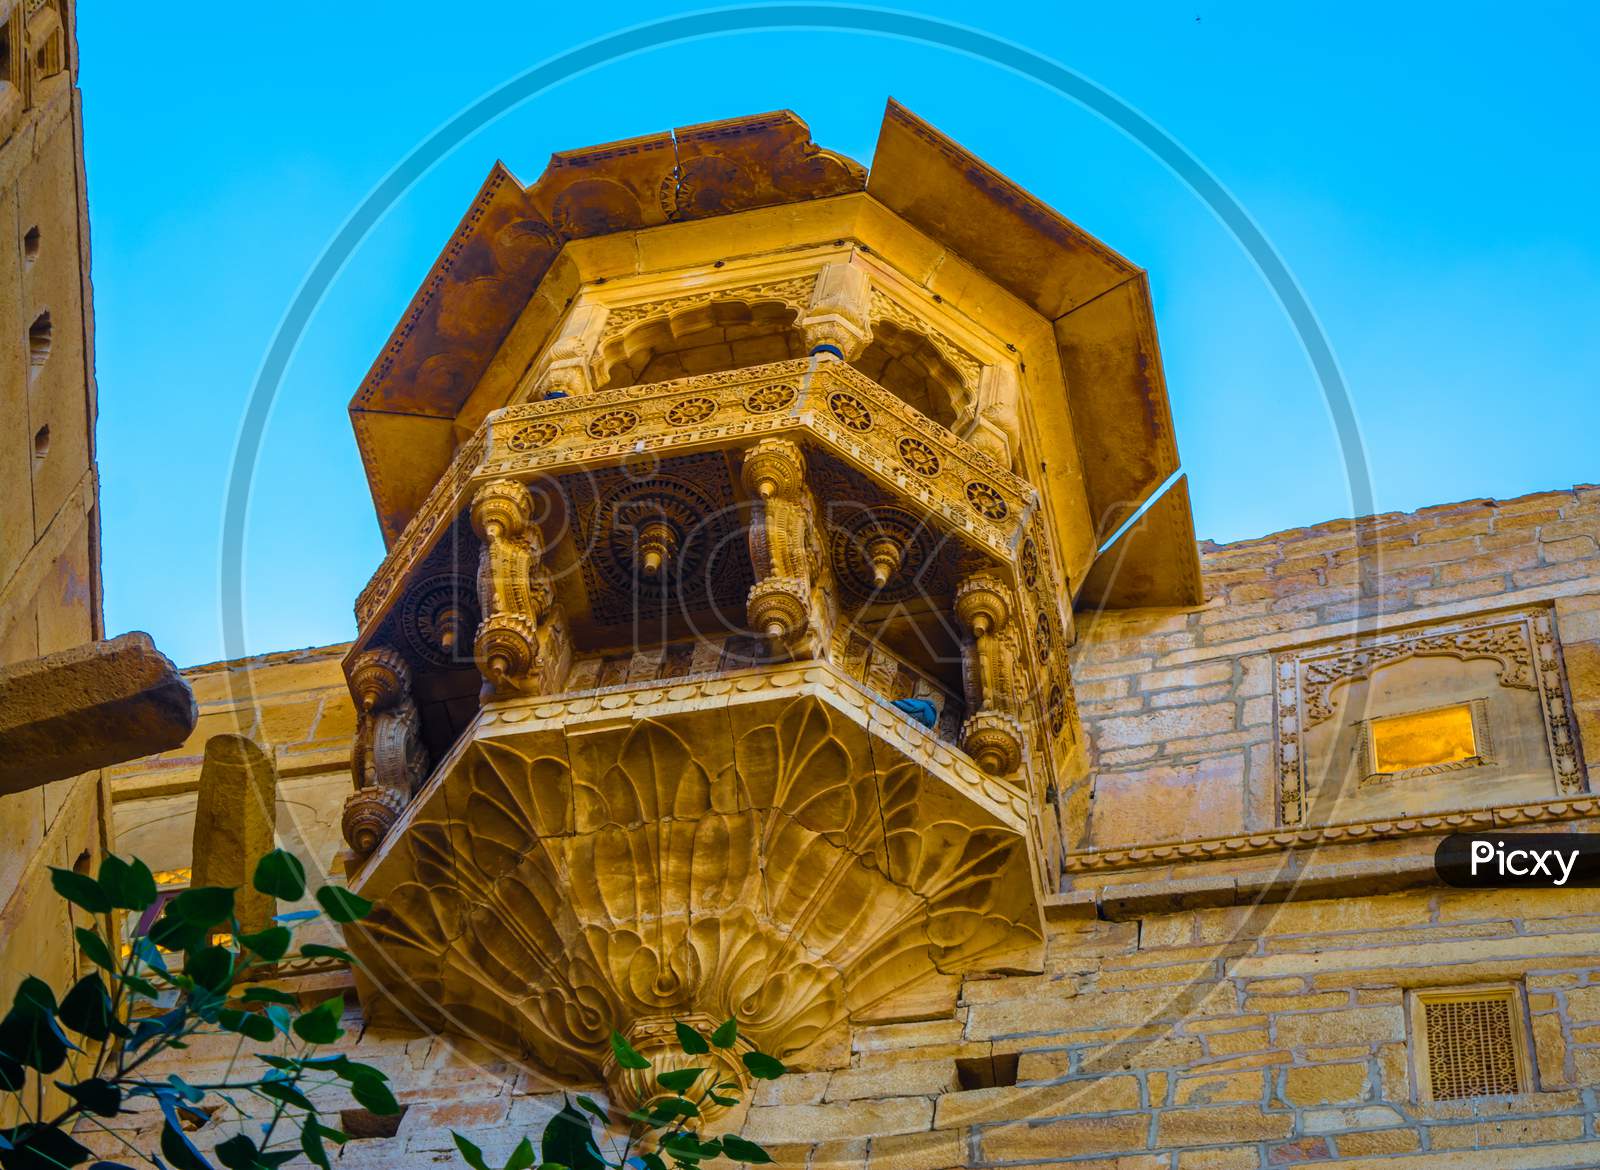 Jaisalmer Fort is situated in the city of Jaisalmer, in the Indian state of Rajasthan